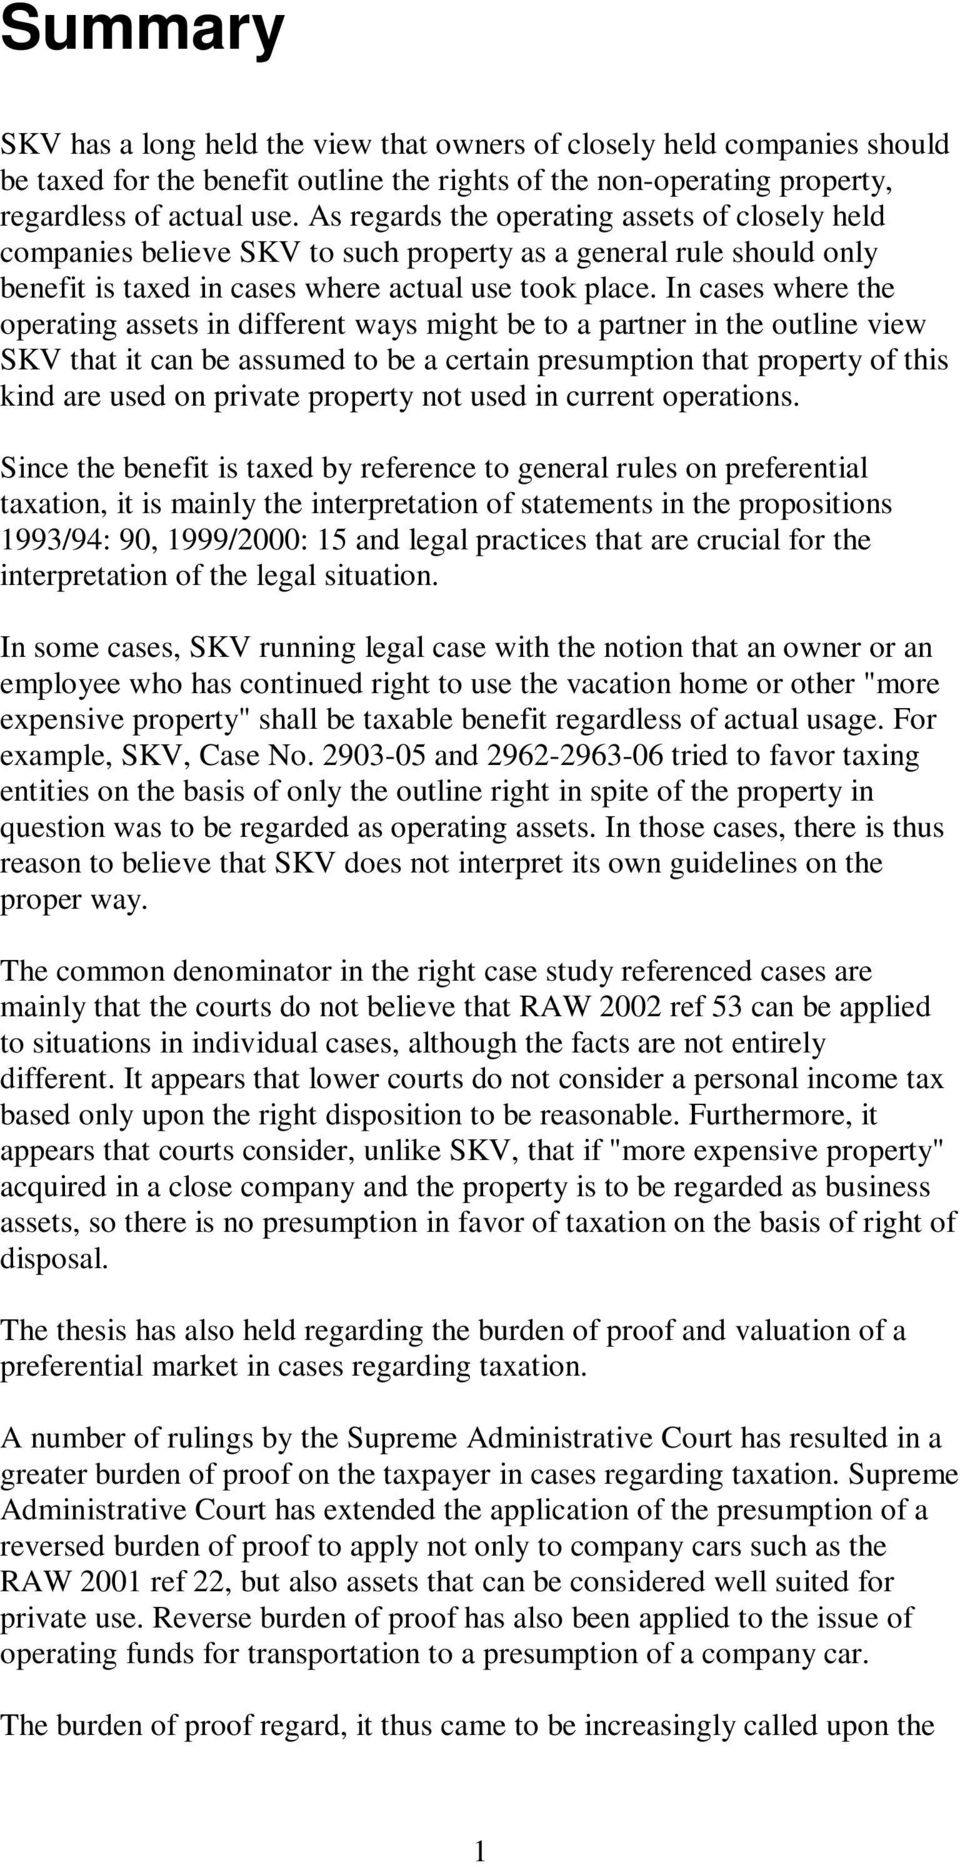 In cases where the operating assets in different ways might be to a partner in the outline view SKV that it can be assumed to be a certain presumption that property of this kind are used on private